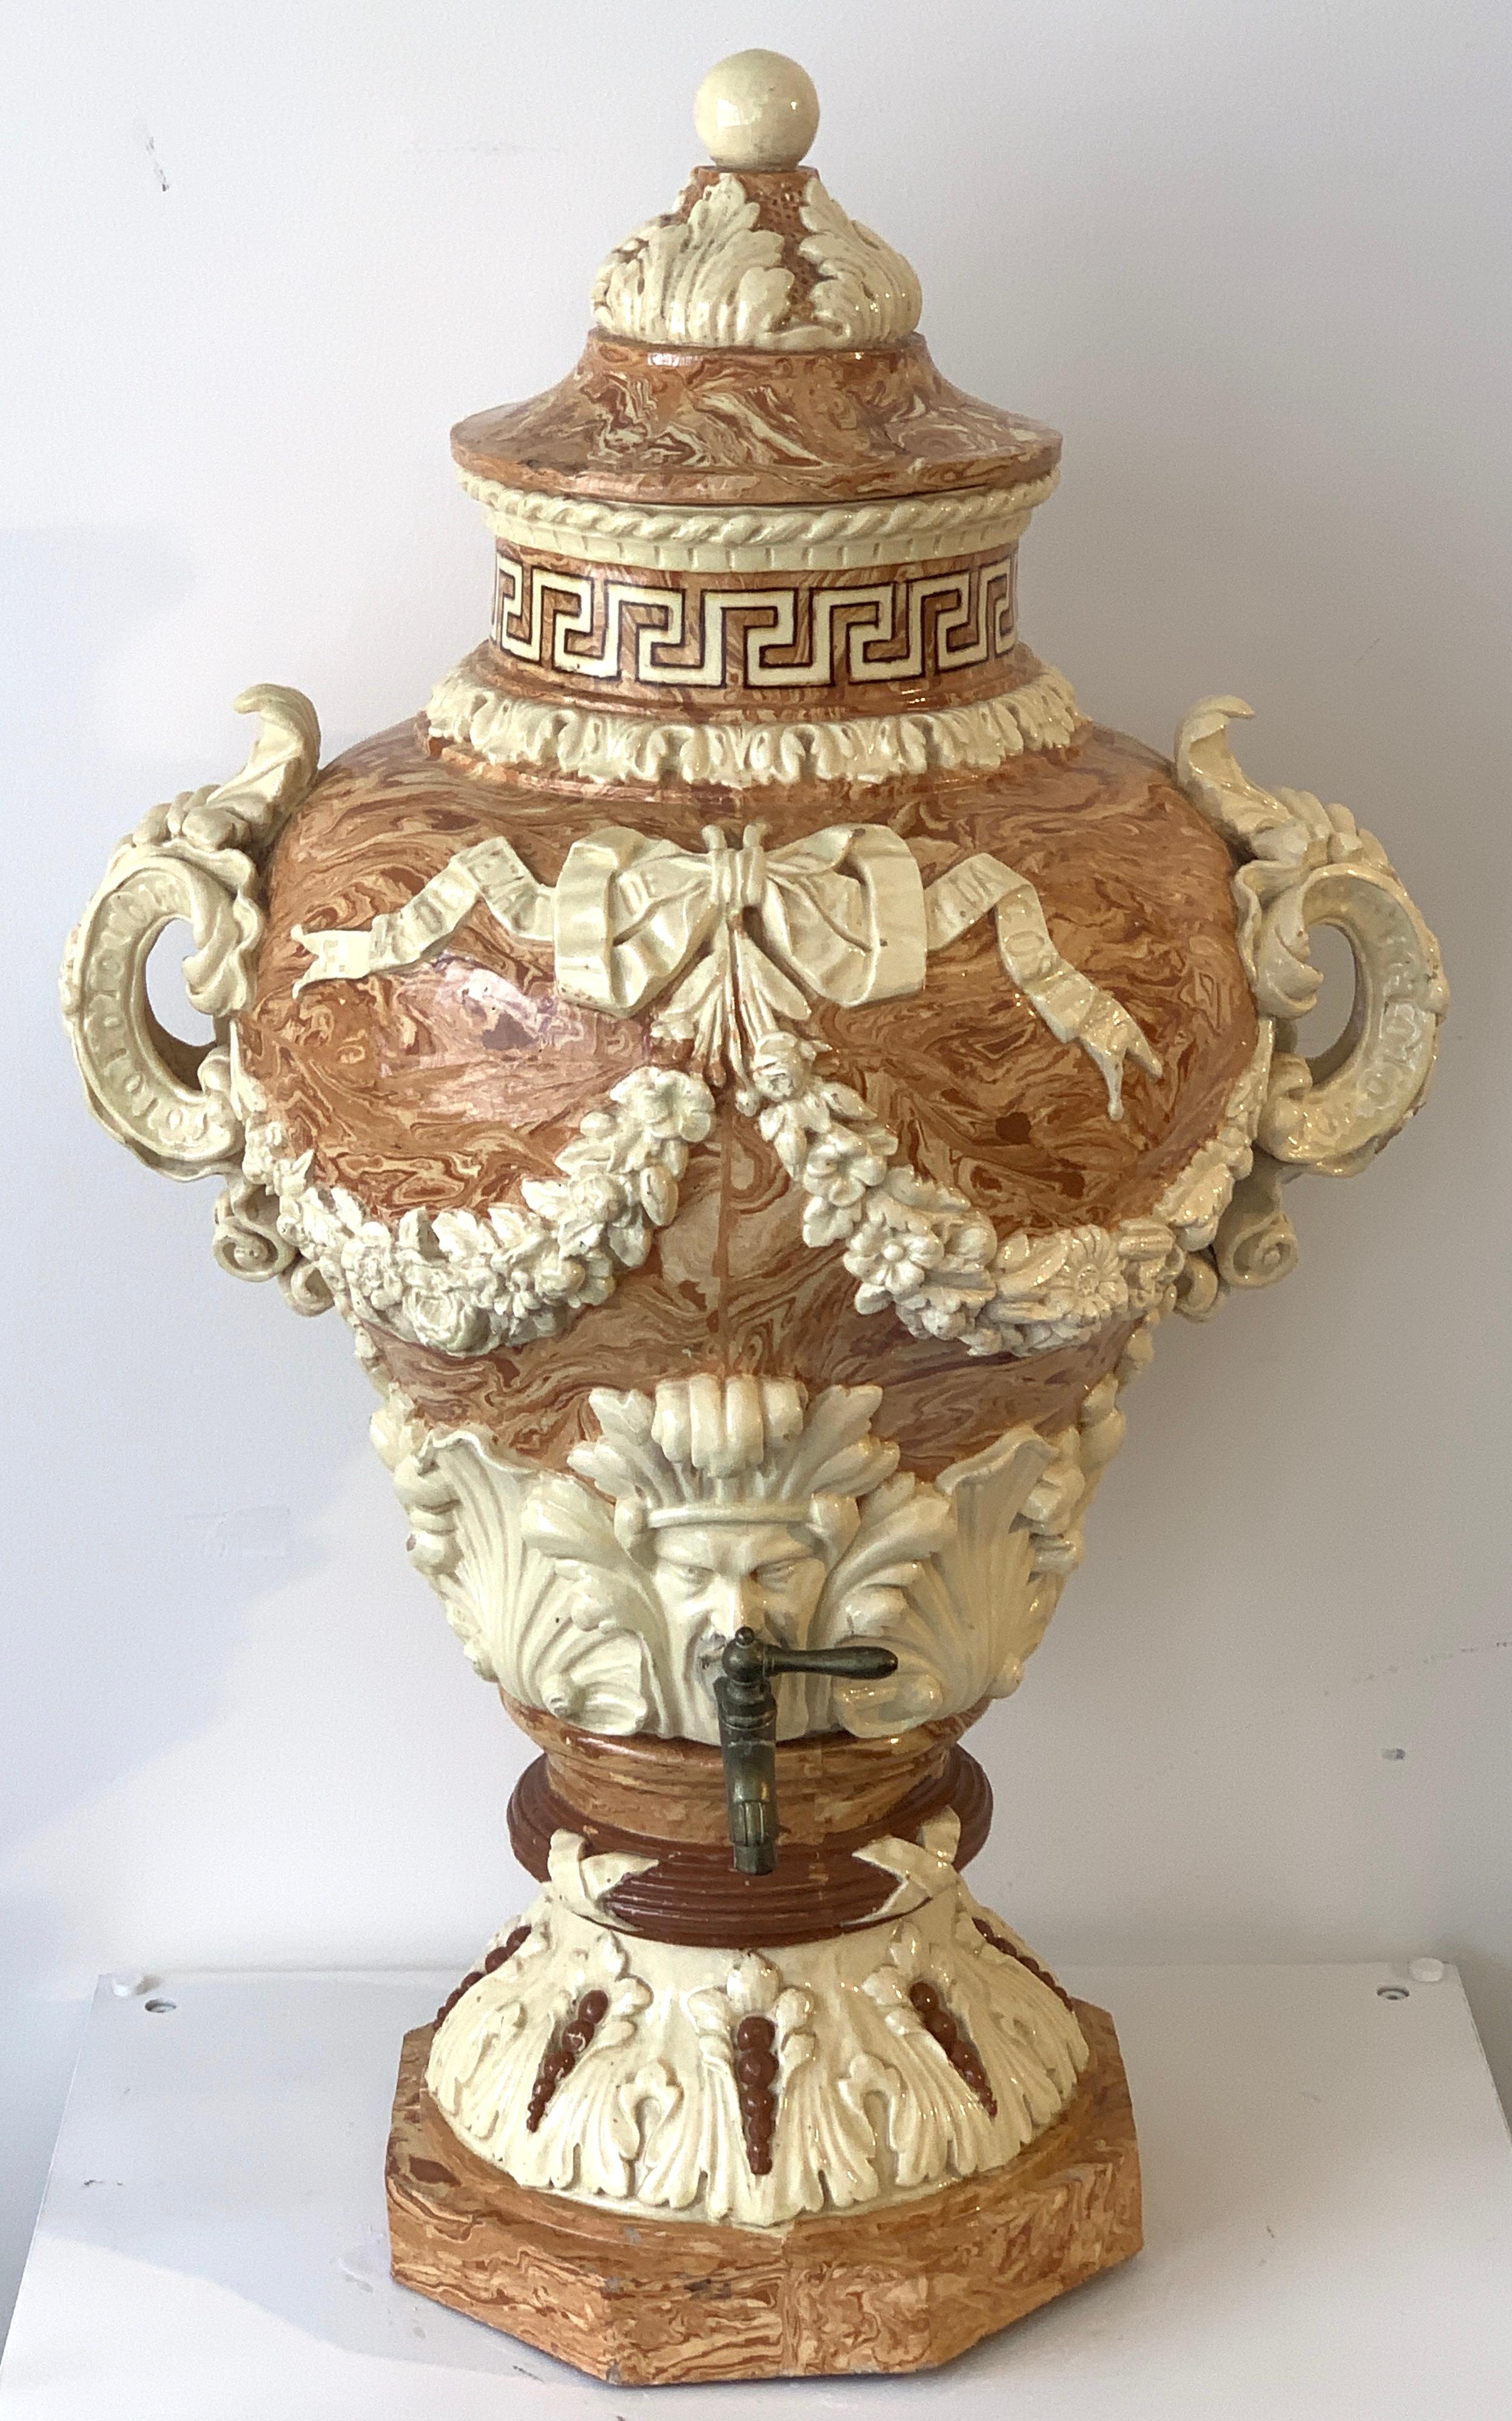 Monumental neoclassical aptware/mixed earth lavabo wine urn, a tour-de-force example of 19th century ceramics. Complete with the removable lid, the neck with Greek Key border, the body with large pierced handles. The urn is unmarked, except for the